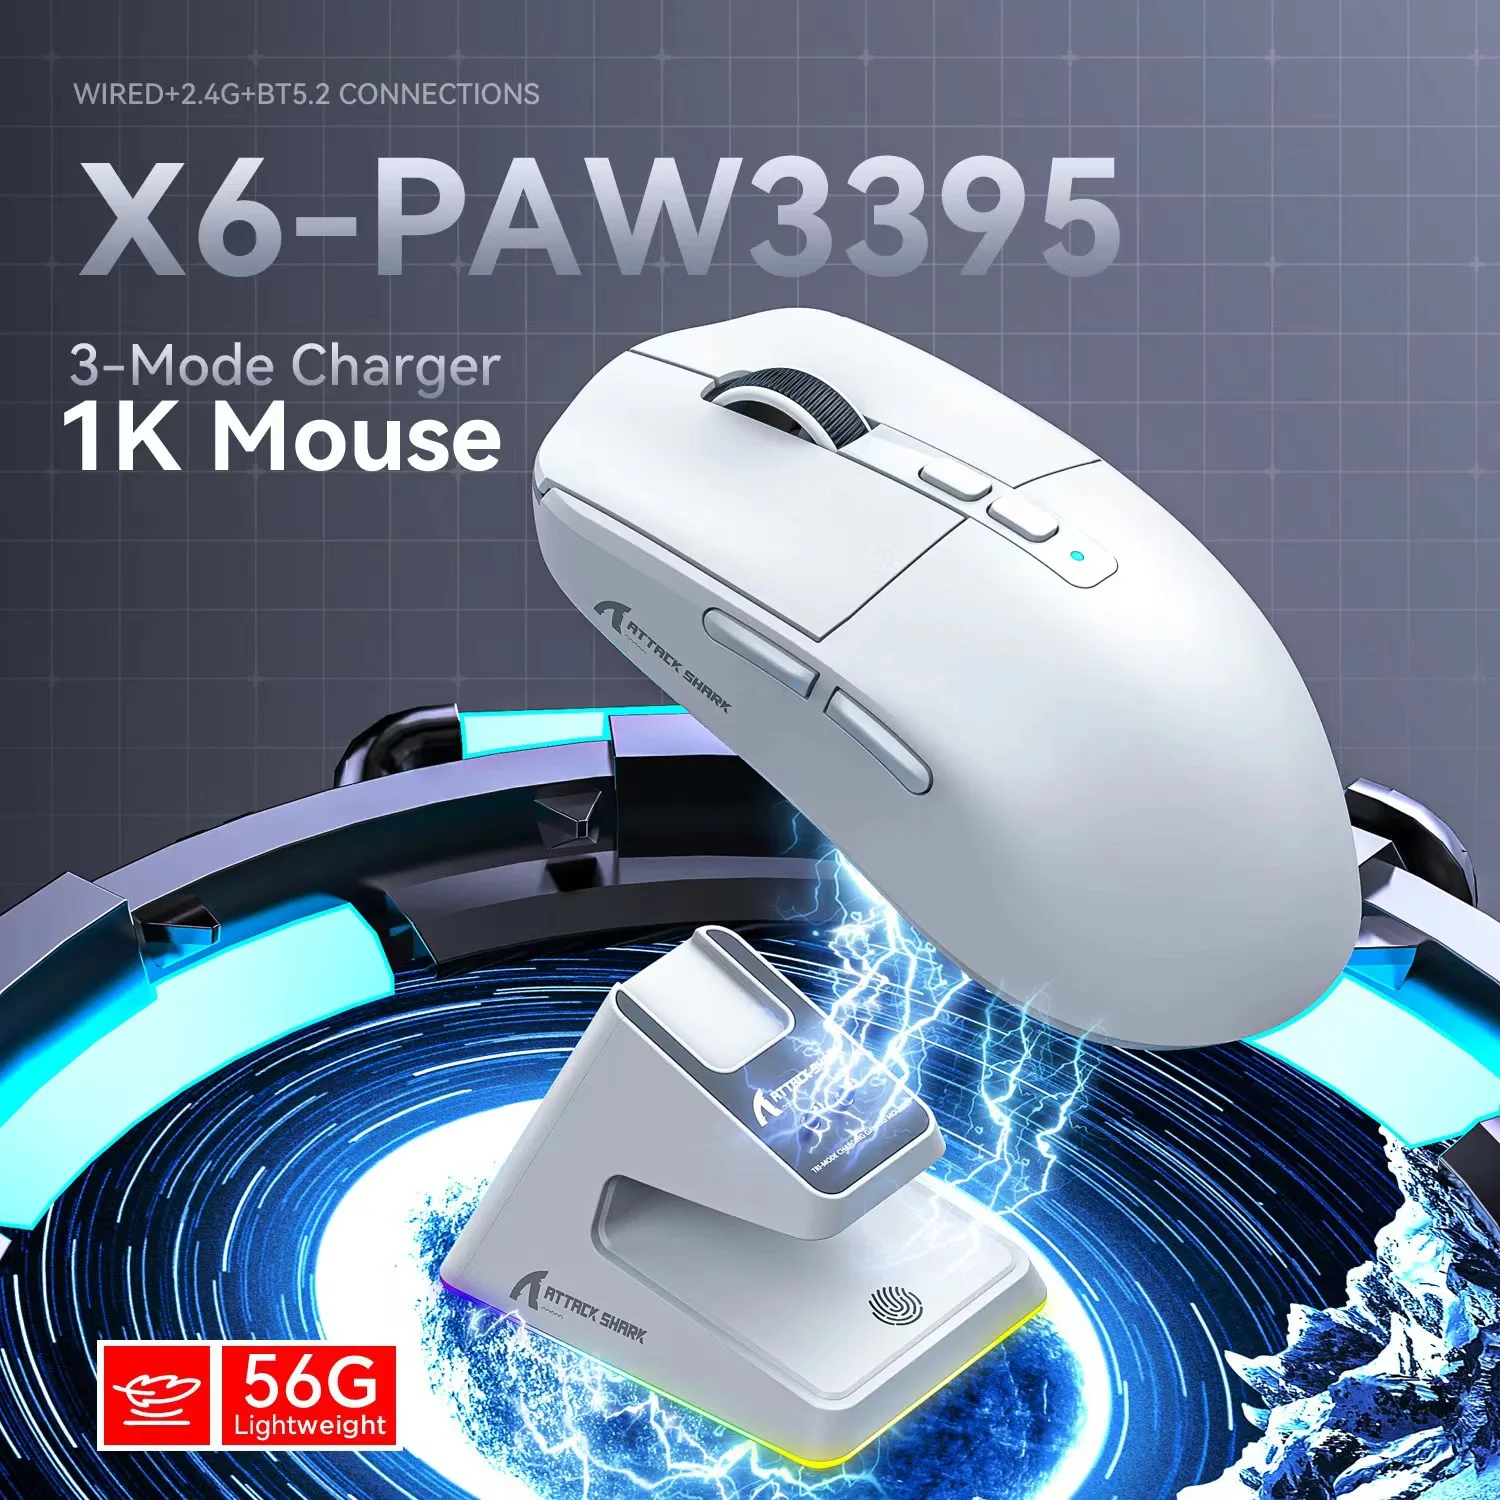 

Attack Shark X6 Bluetooth Mouse PixArt PAW3395 custom Tri-Mode Connection RGB Touch Magnetic Charging Base Macro Gaming Mouse